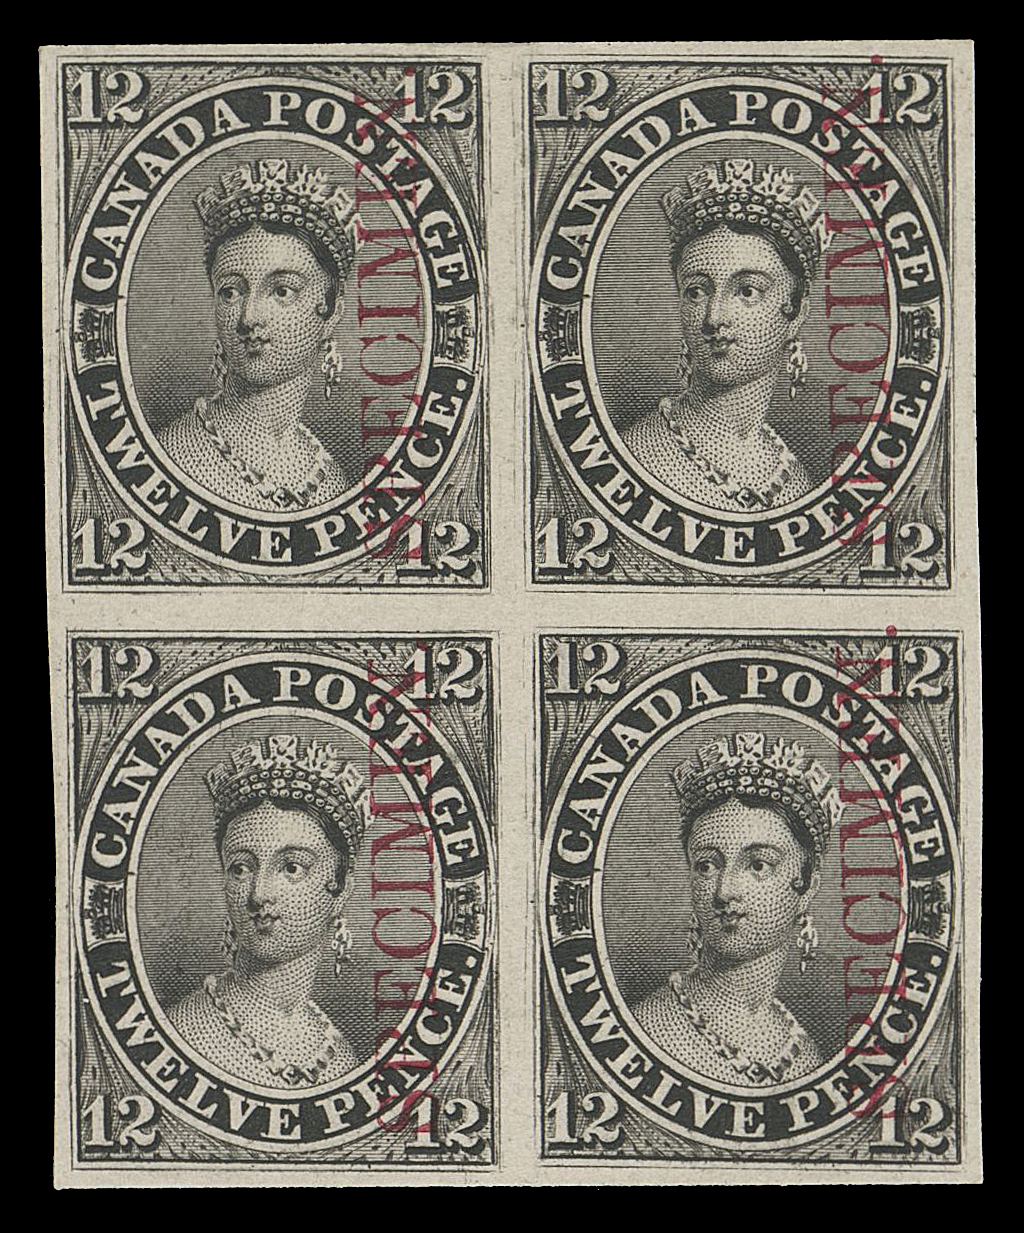 TWELVE PENCE  3Pi,A lovely plate proof block of four on card mounted india paper with vertical SPECIMEN overprint in carmine; few blocks survive, VF and choice

This block corresponds to plate positions 25-26 / 35-36 (Left Pane).